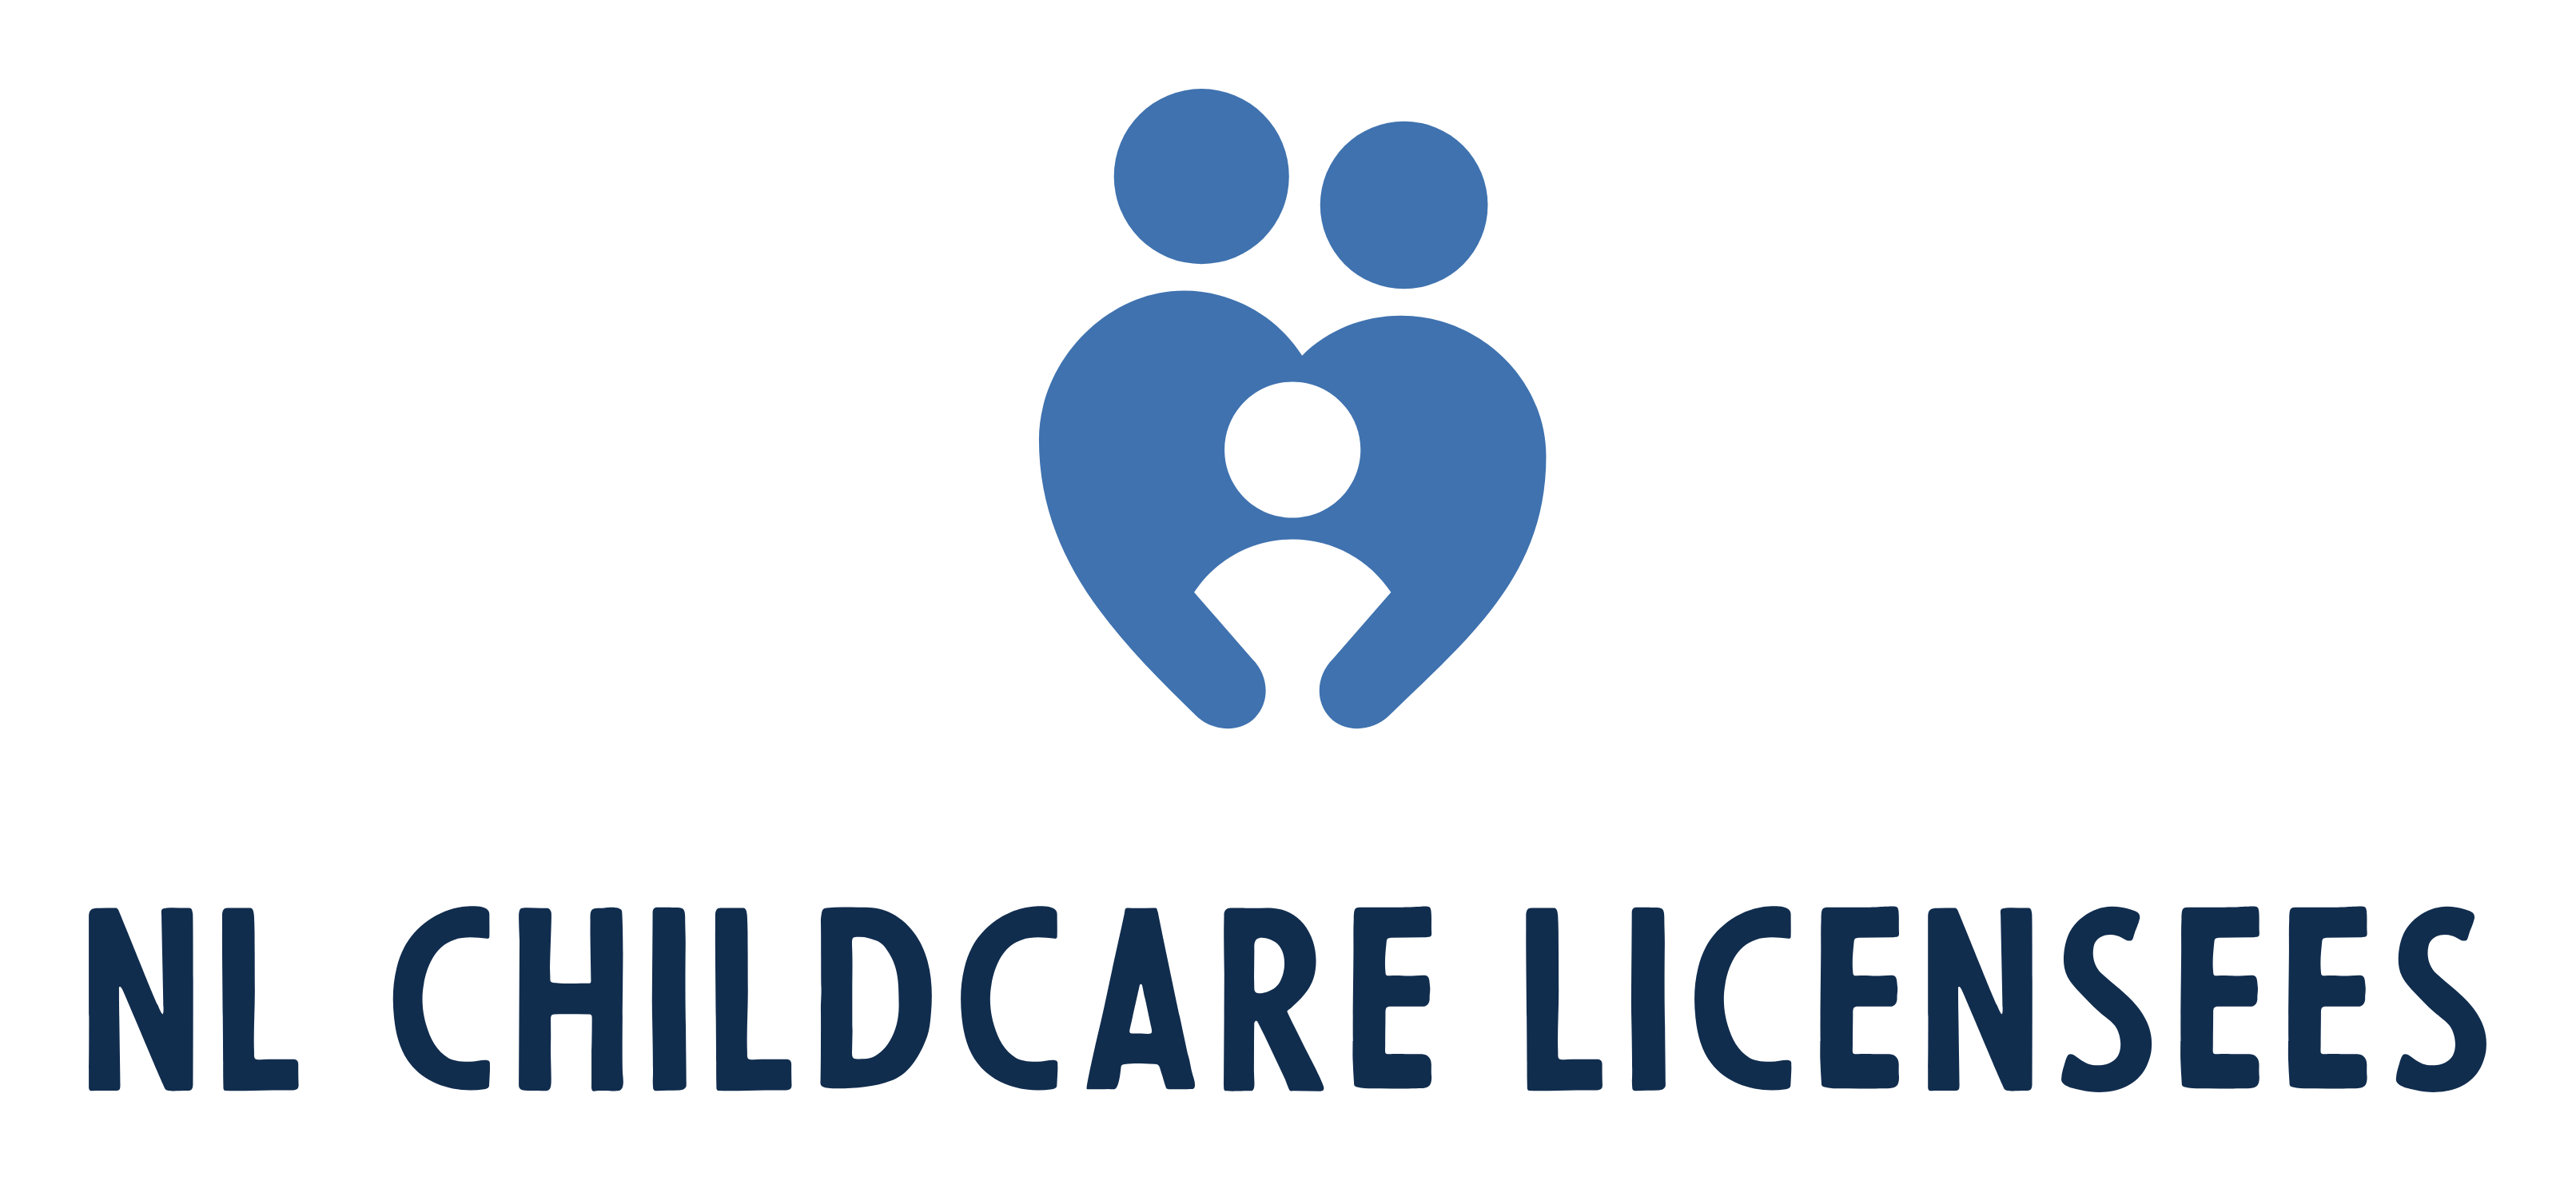 NL Childcare Licensees